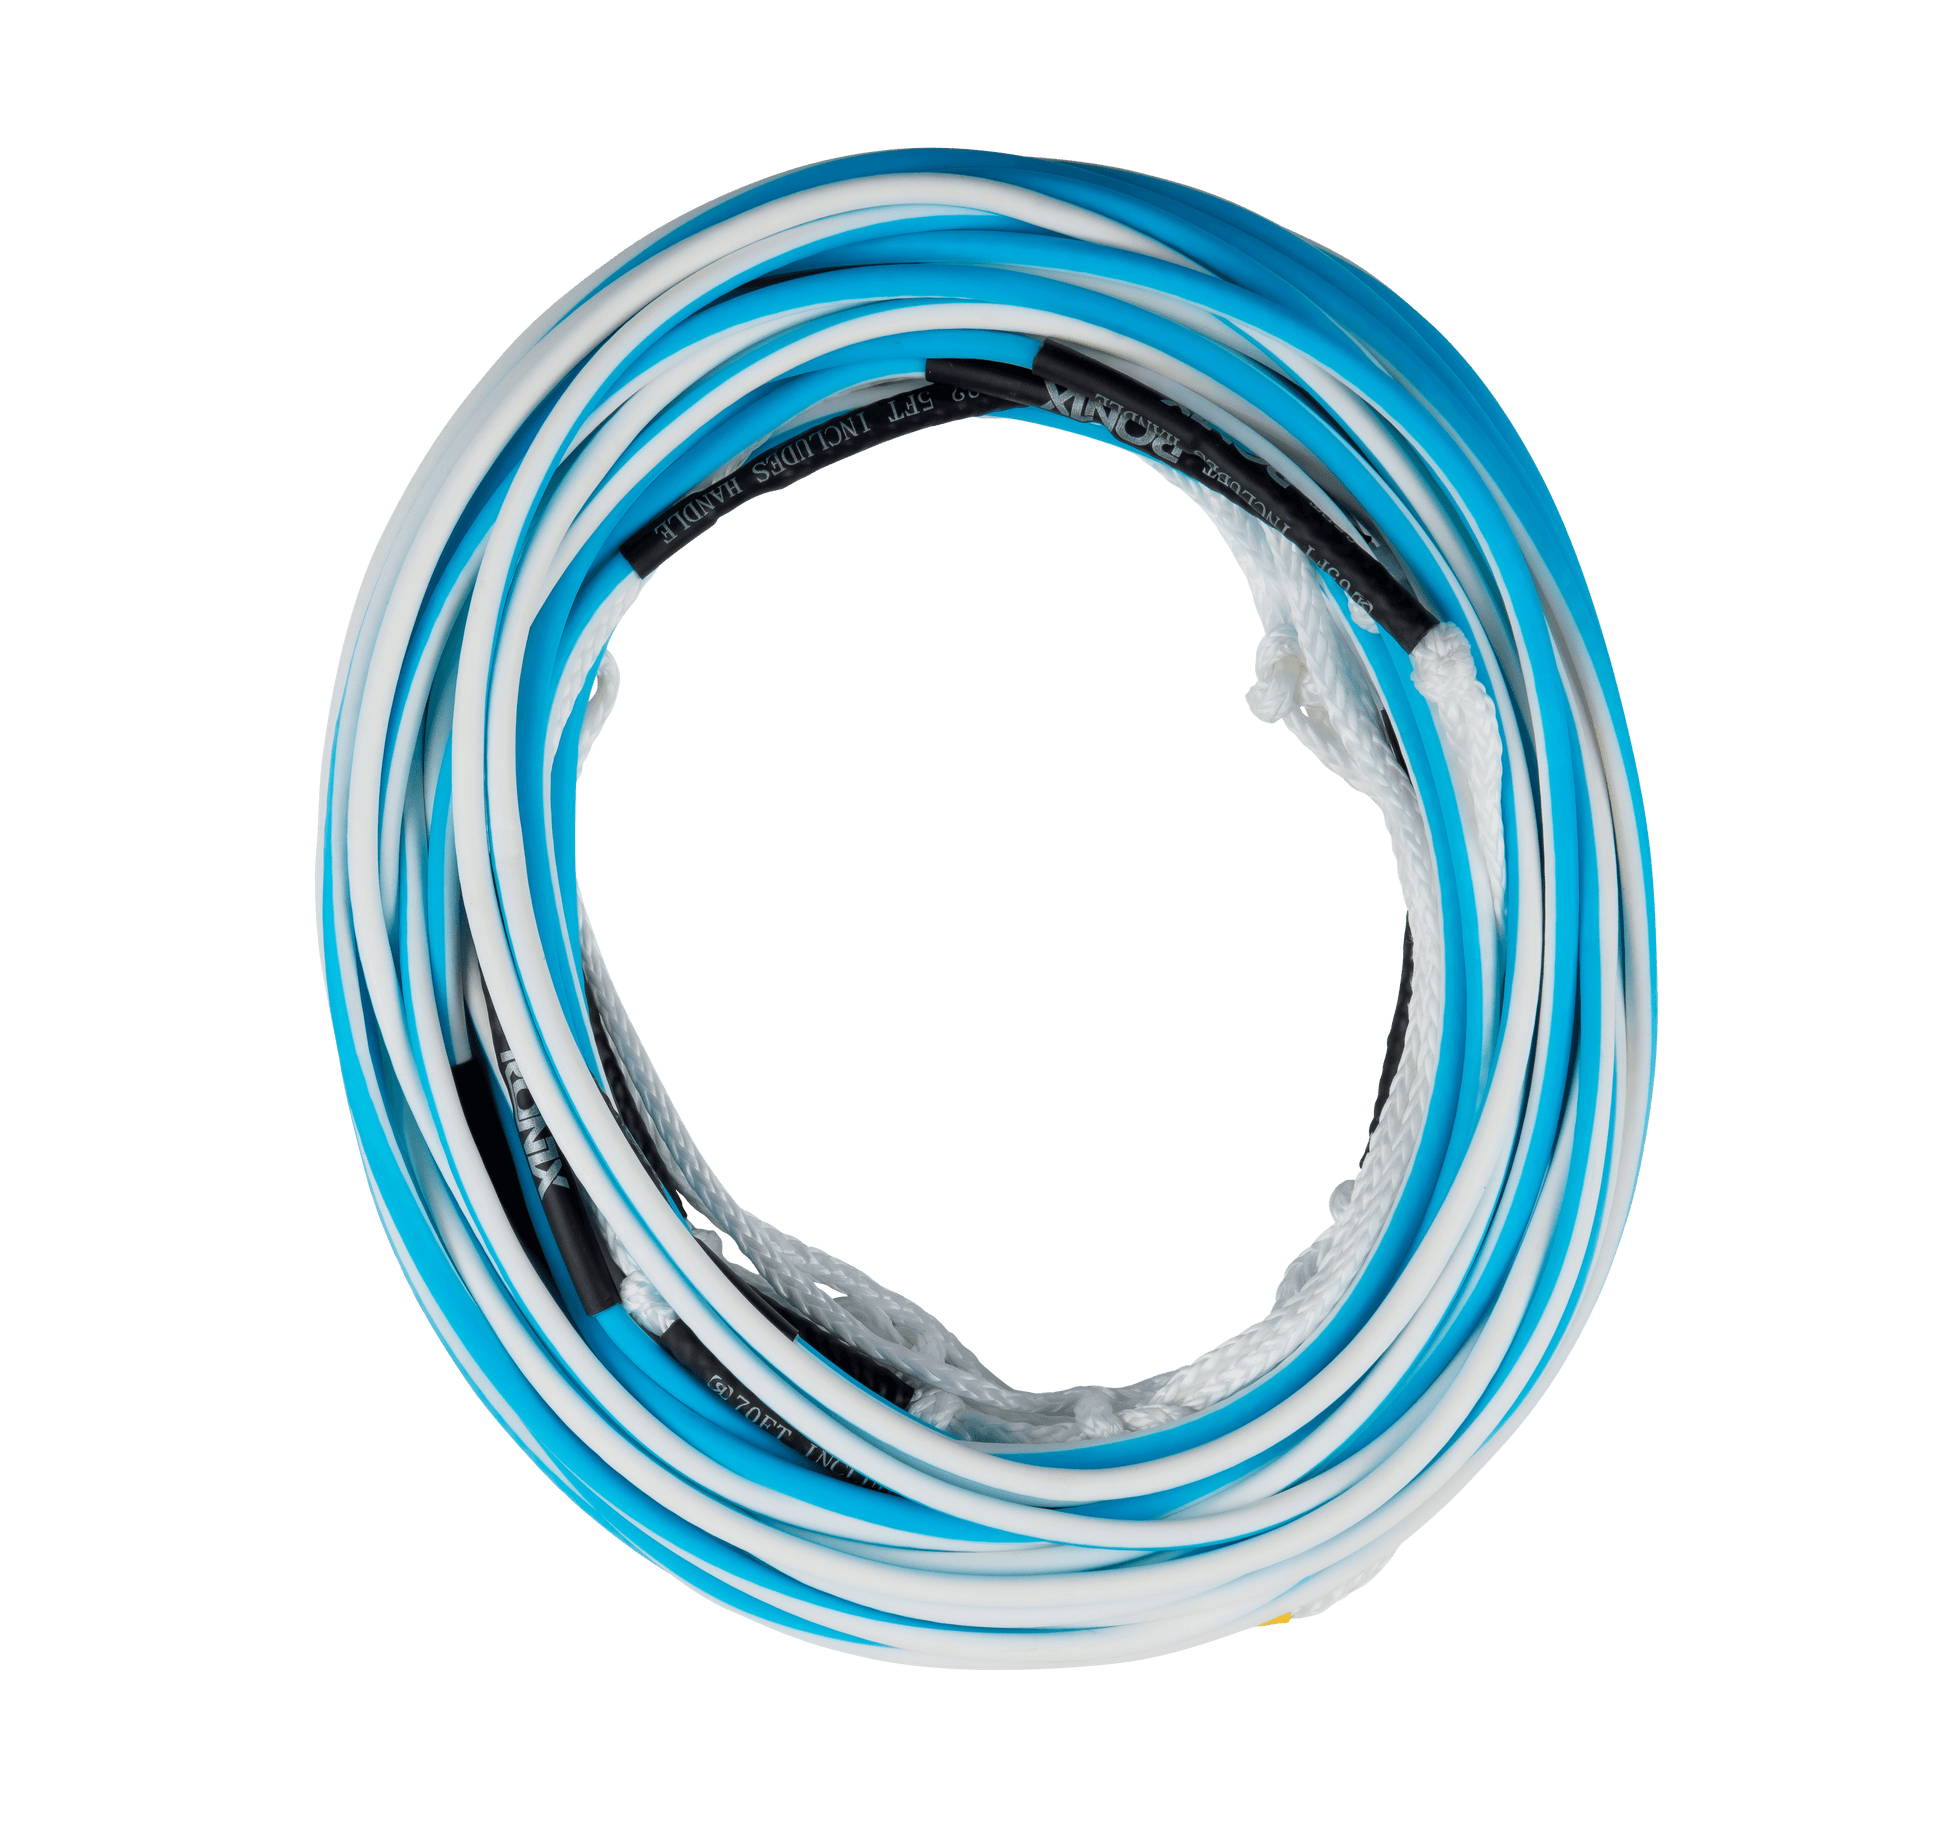 2023 Ronix R8 Floating Mainline Watersports - Ropes And Handles - Wake Ropes Ronix Cyan Blue / White Each 